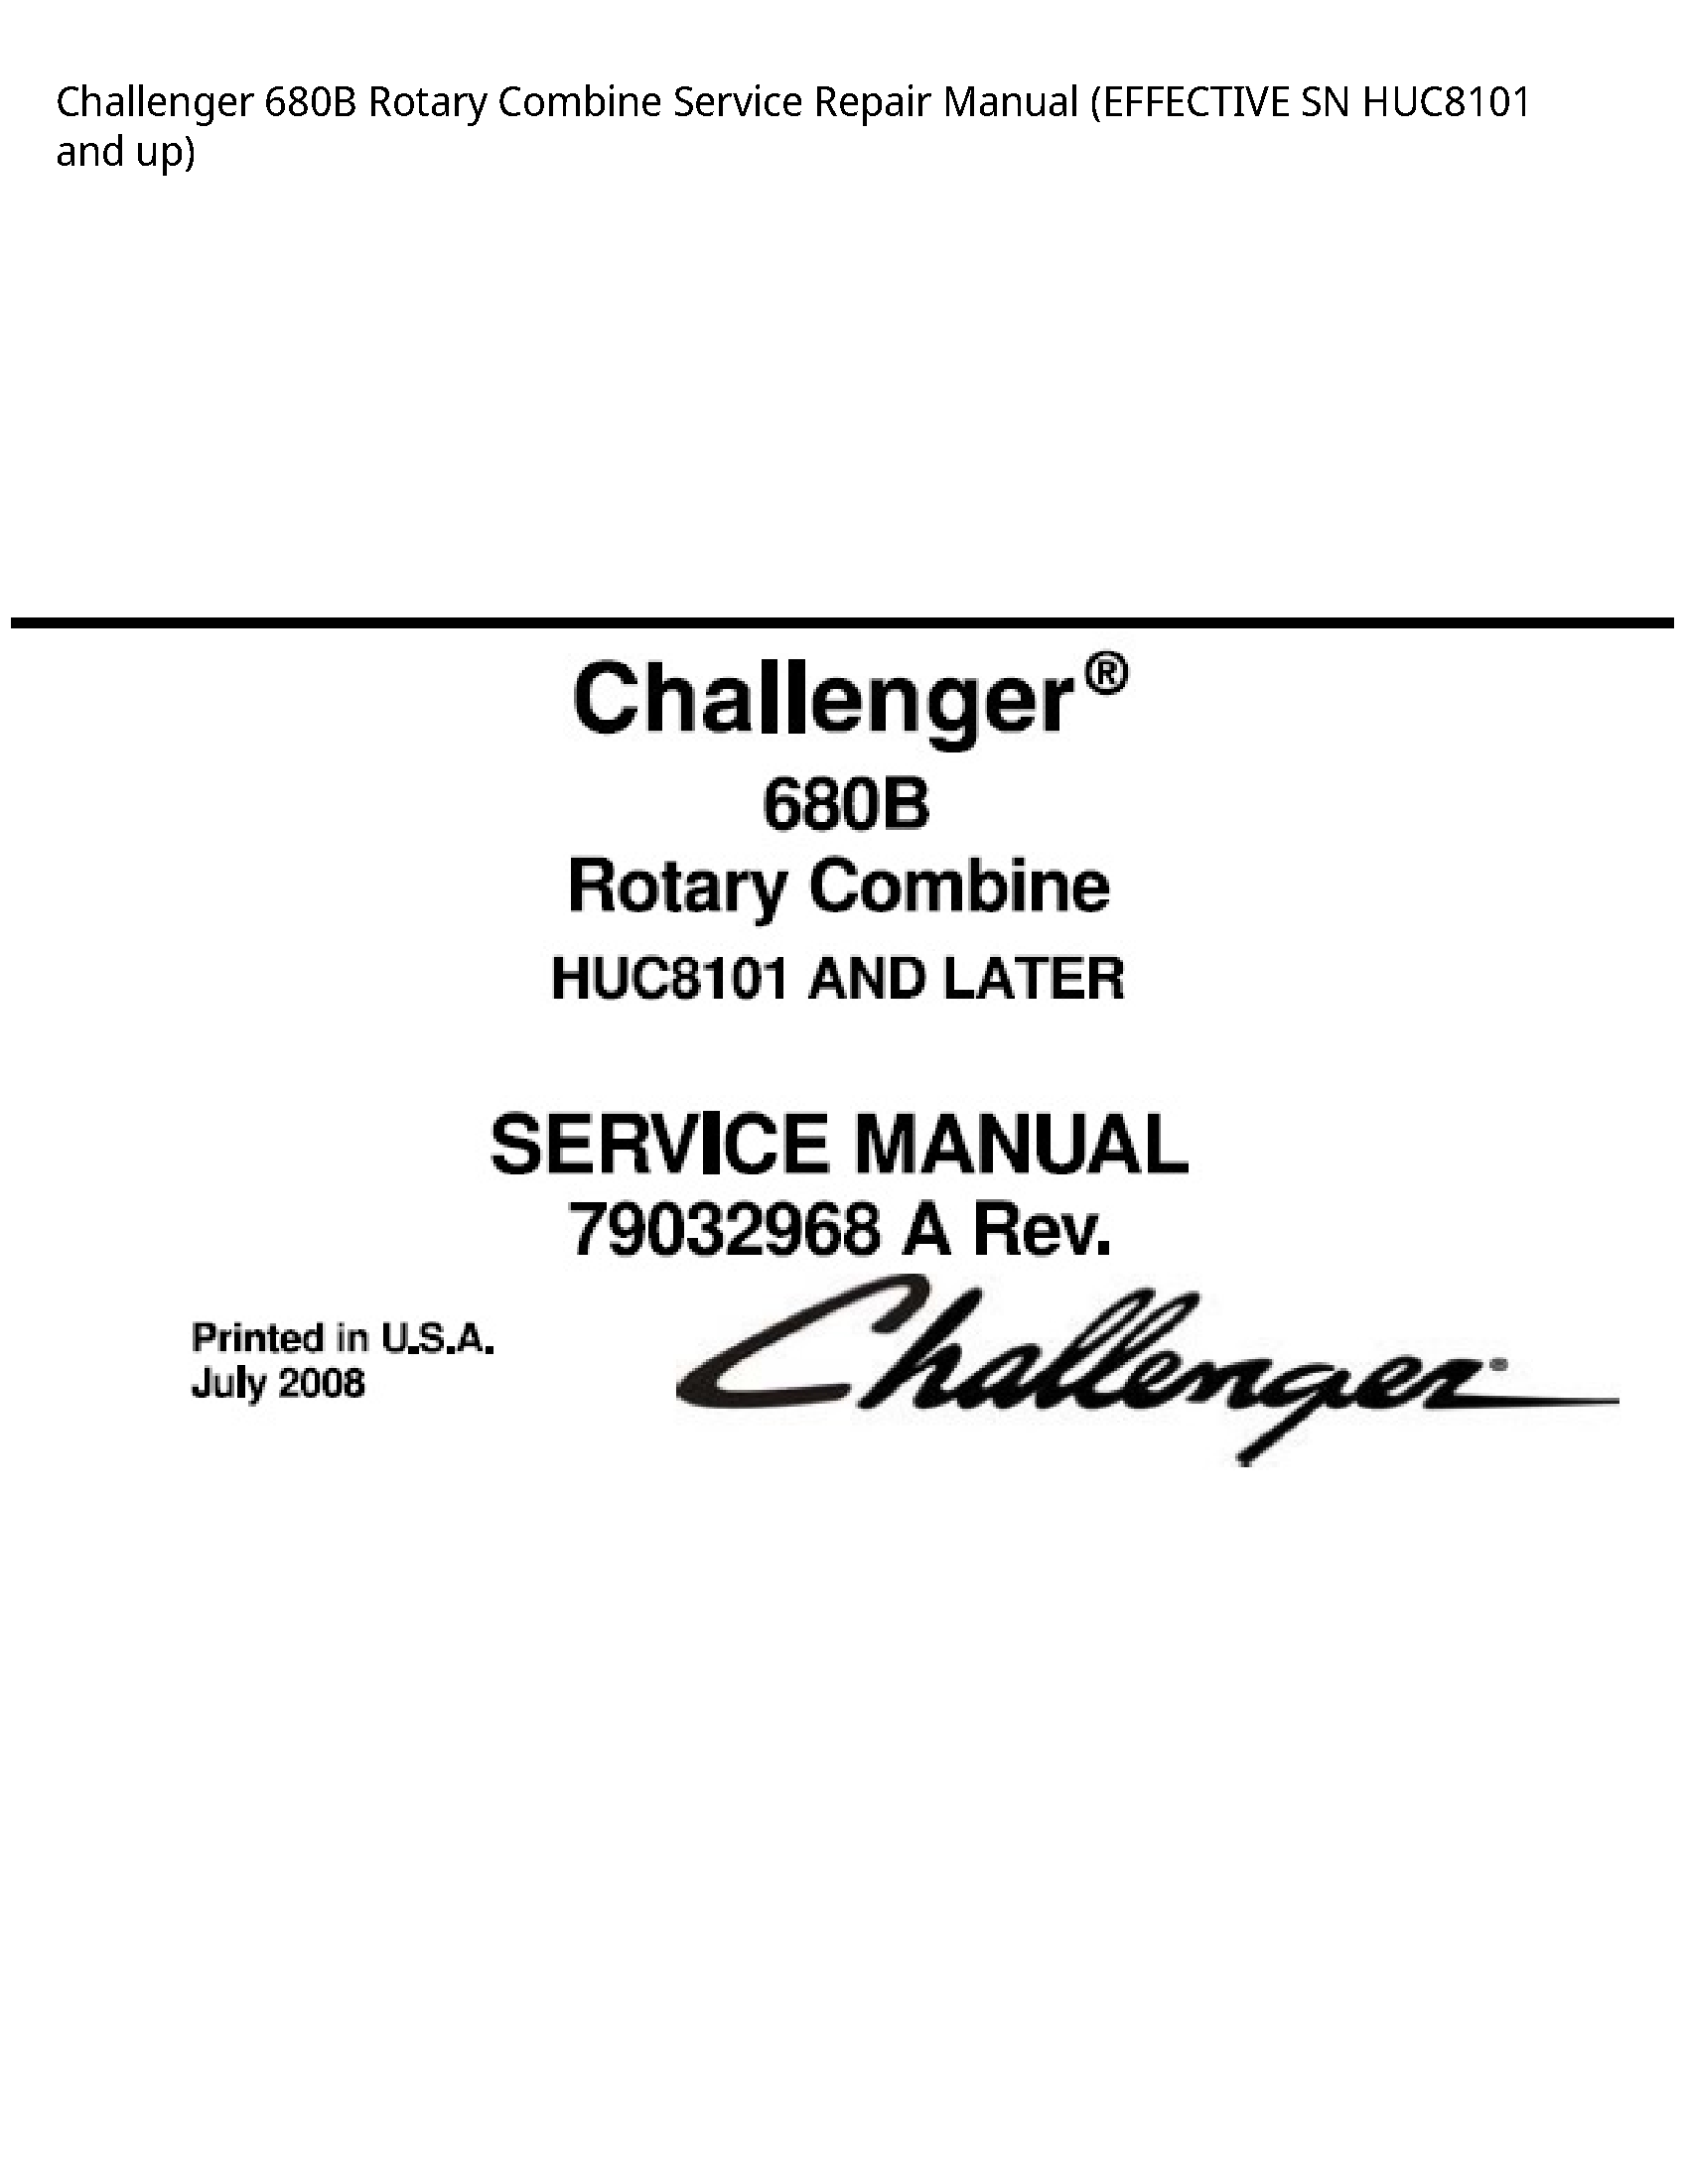 Challenger 680B Rotary Combine manual